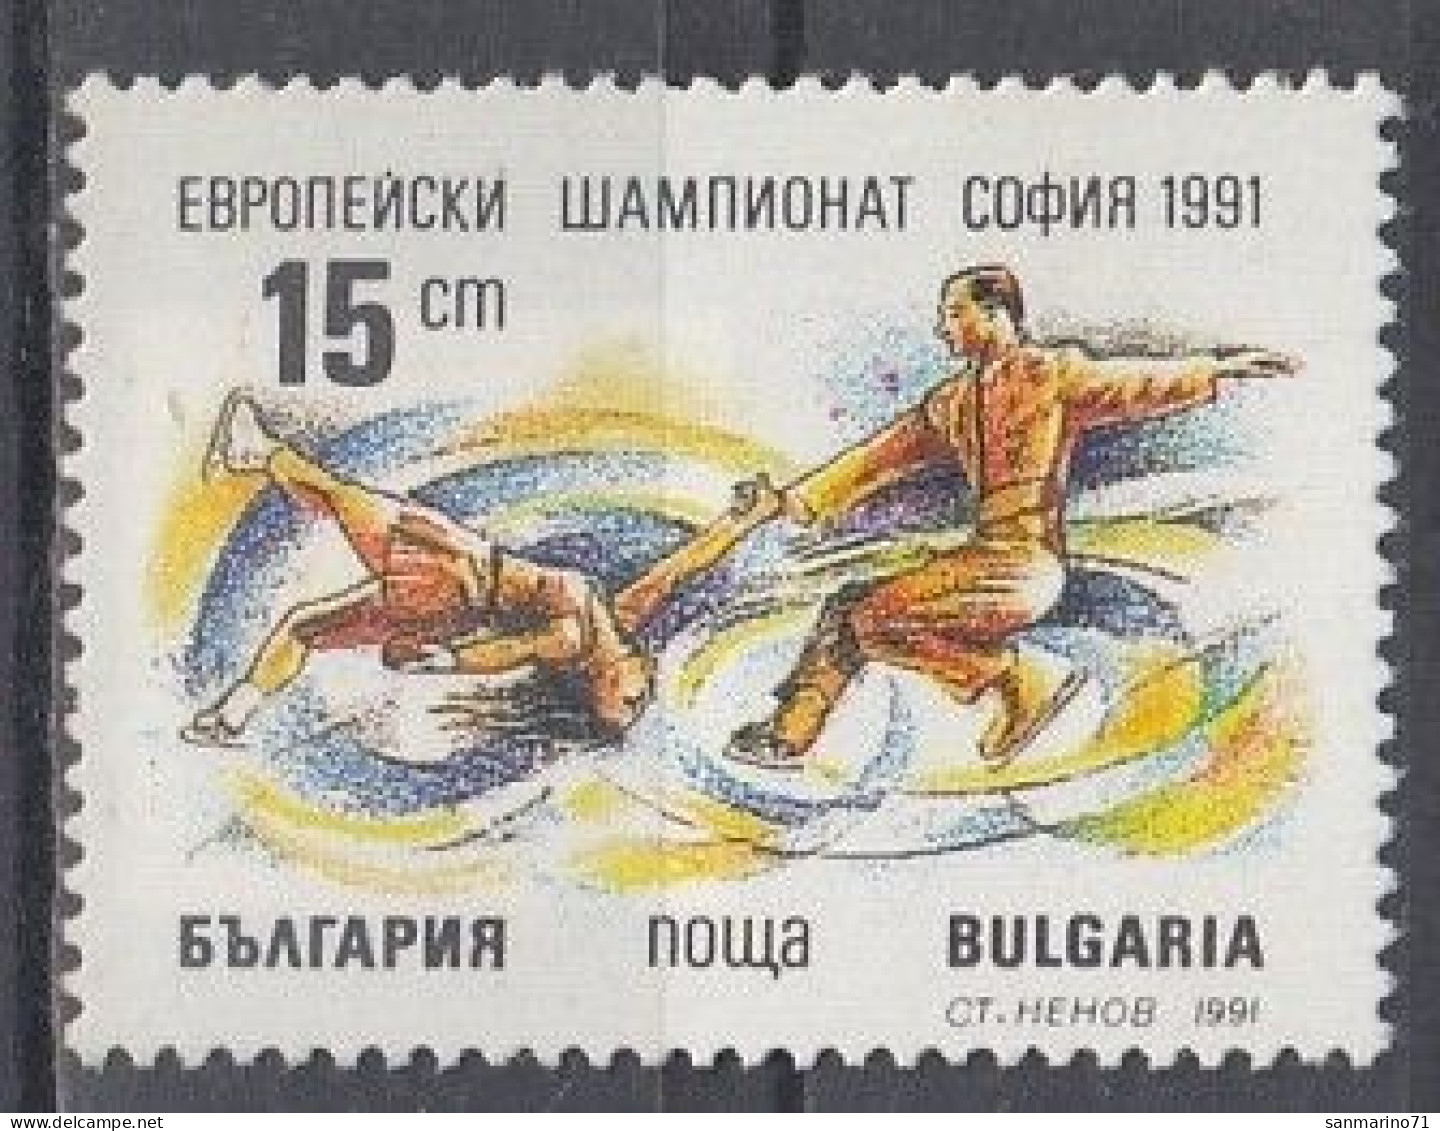 BULGARIA 3880,used,falc Hinged - Used Stamps